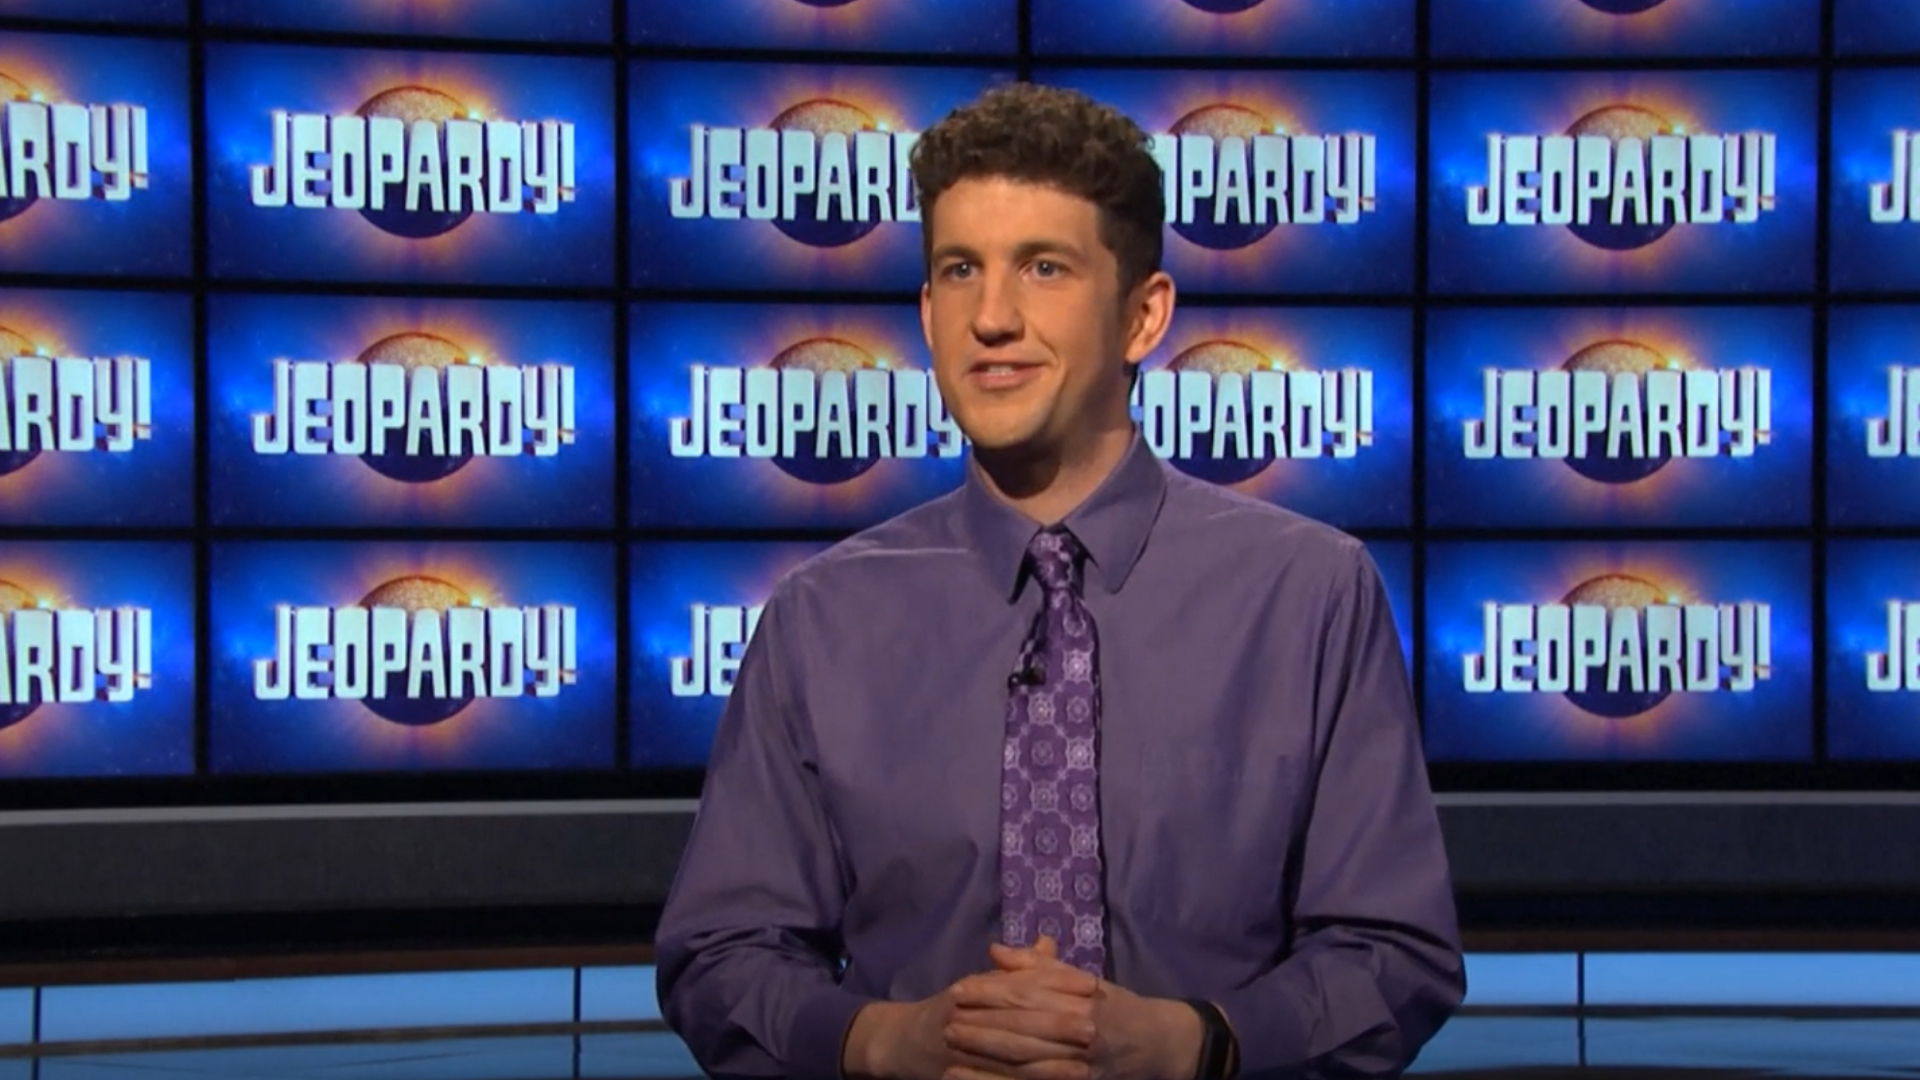 Ohio State University graduate and the man who is on a hot winning streak, Matt Amodio, talks about his experience in "Jeopardy!"